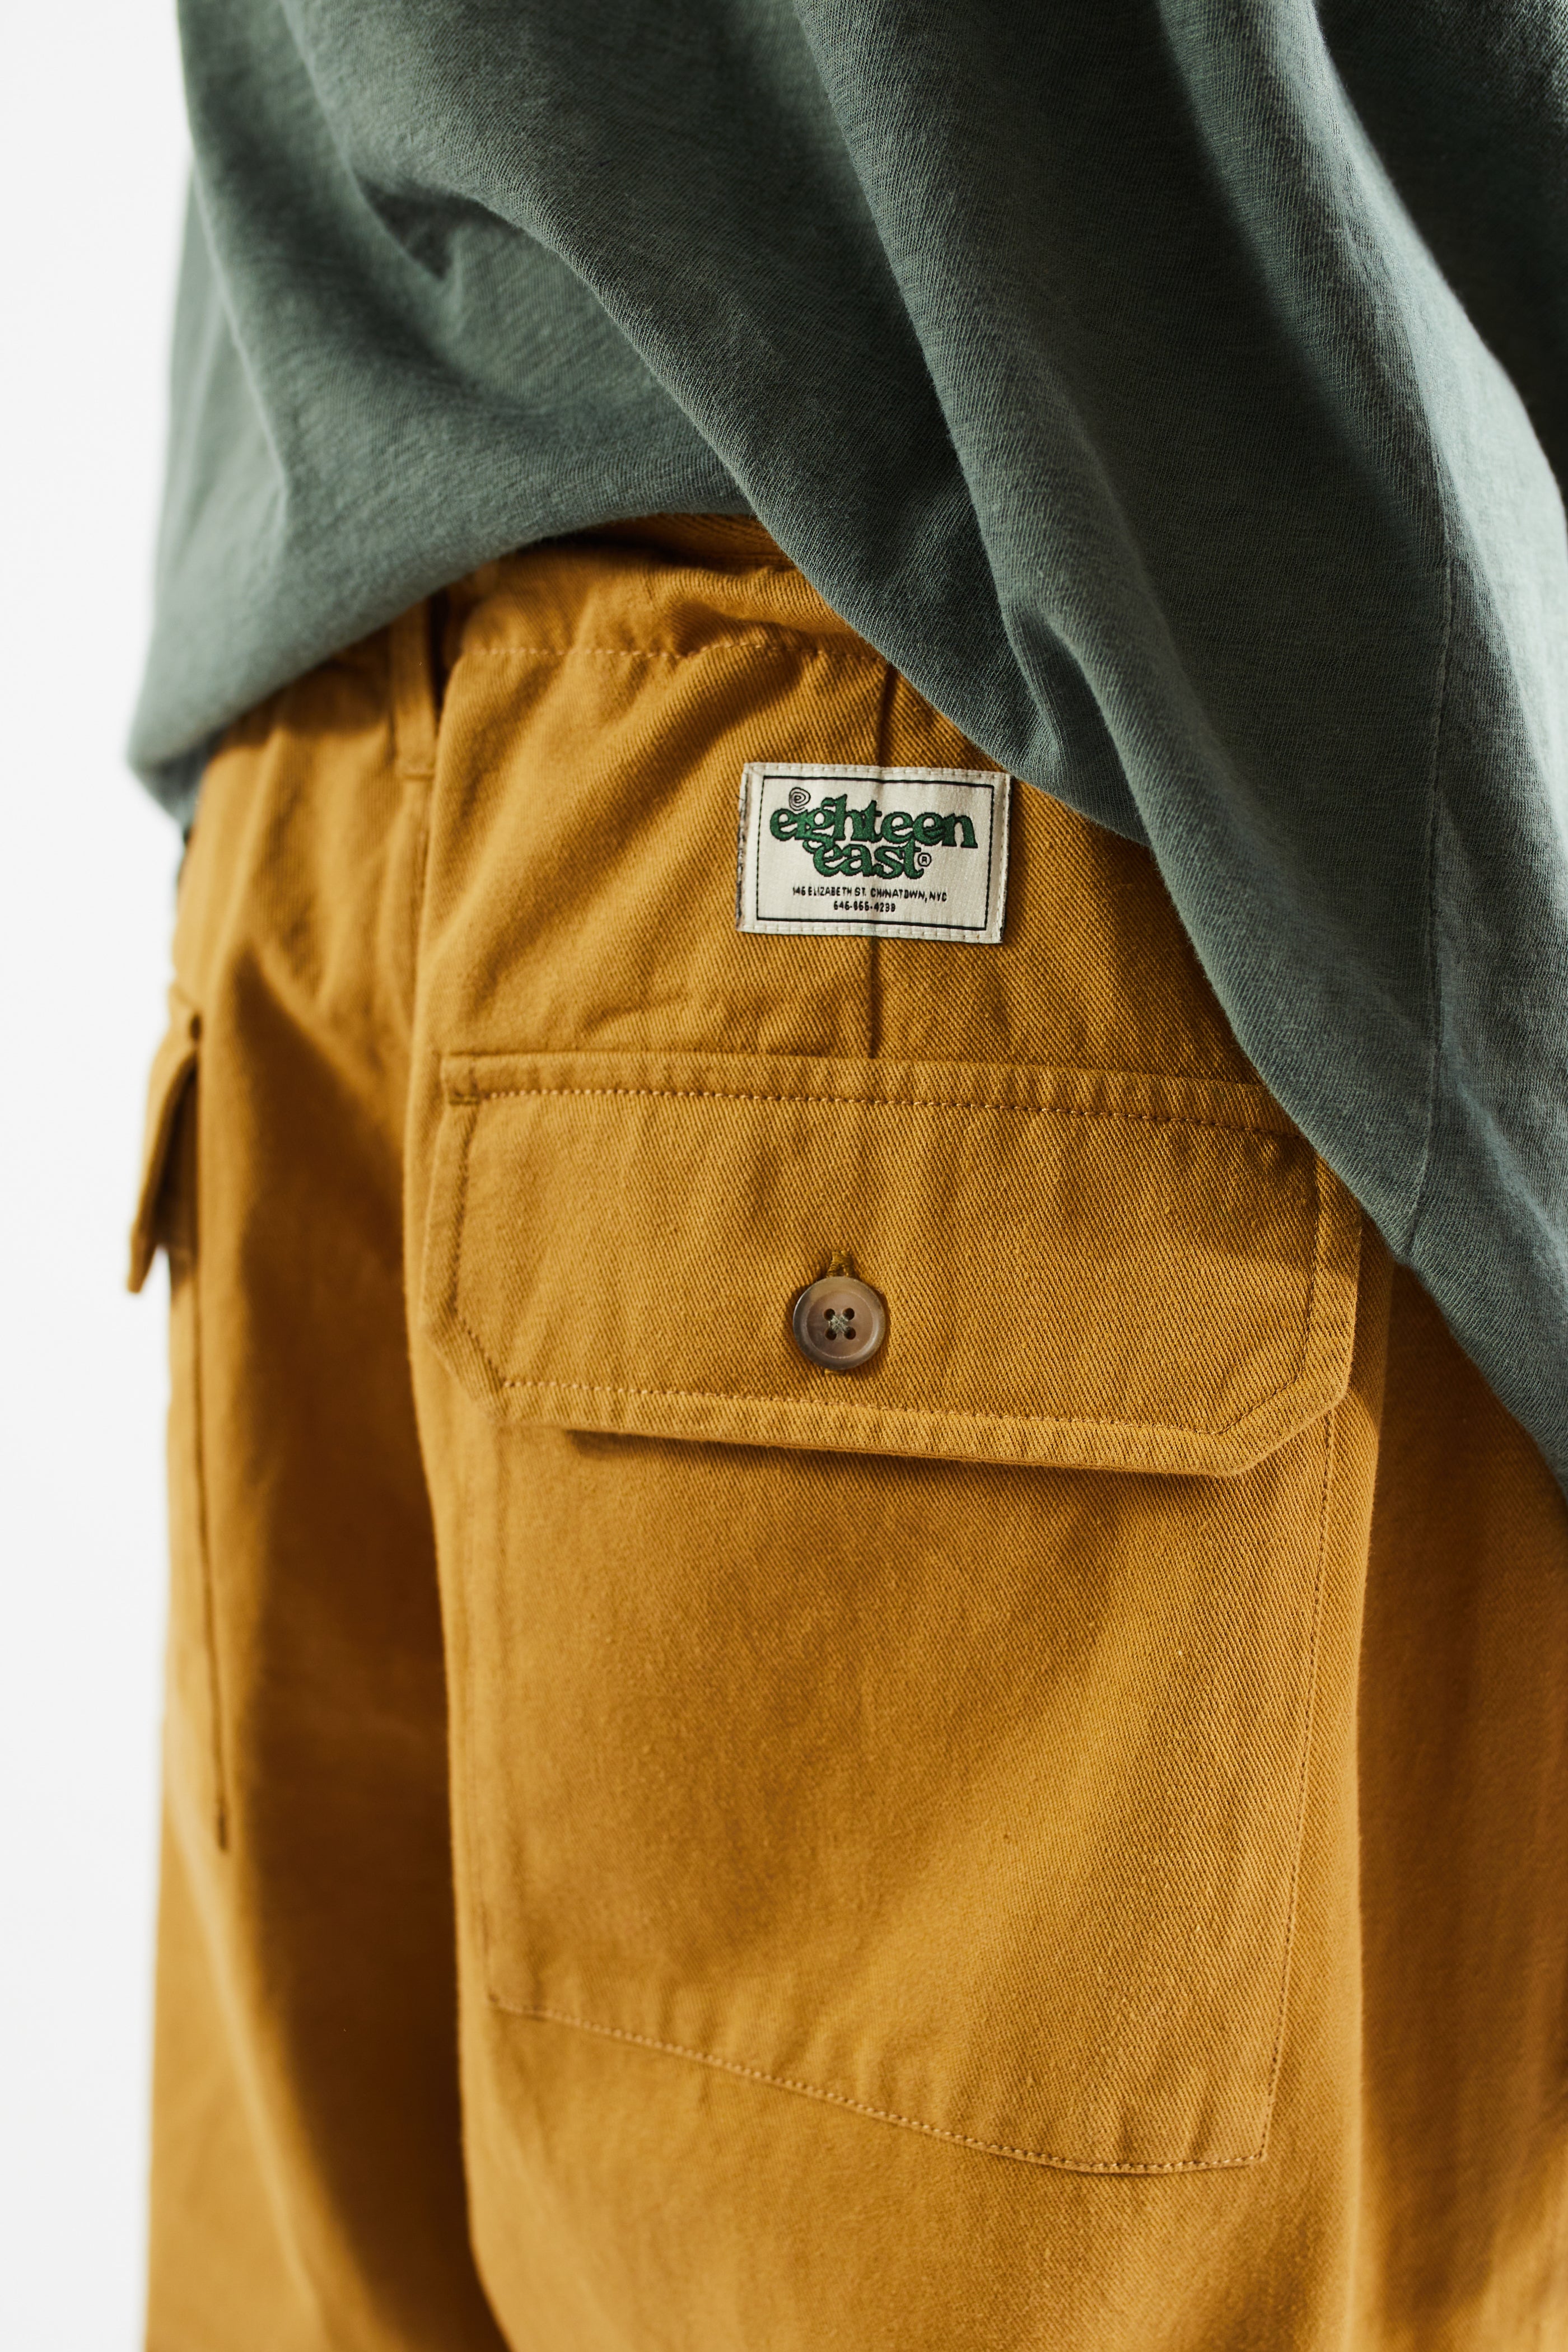 SHELTER PANT - FENNEL SEED HOMEGROWN TWILL